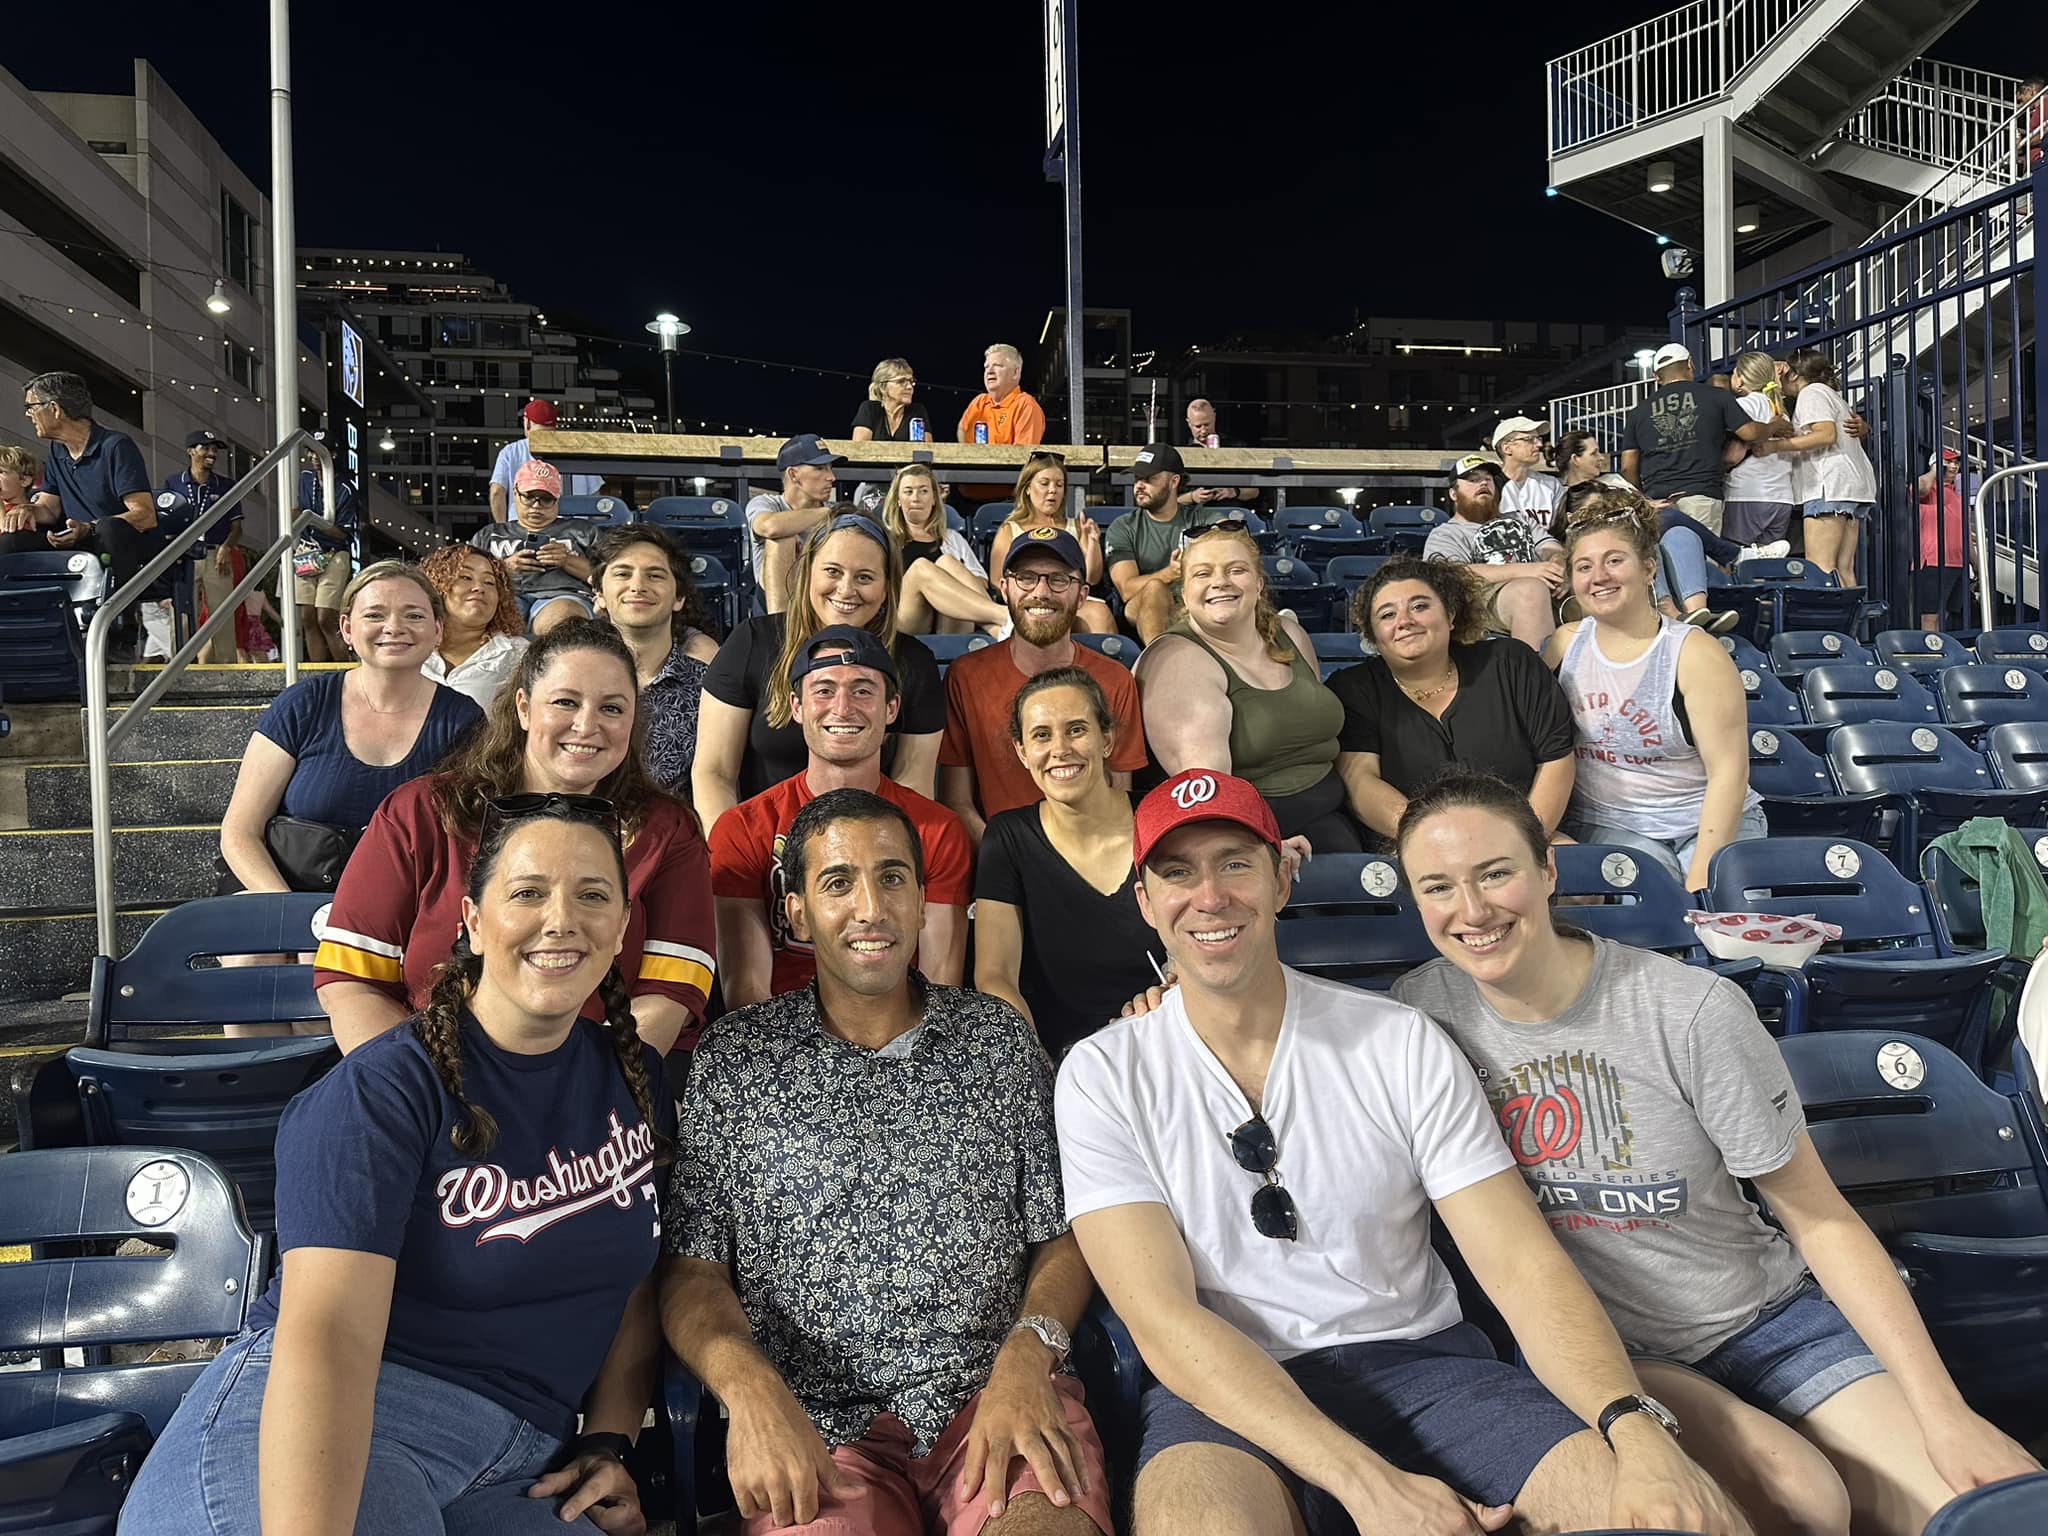 Rebecca and friends at a Nats game!